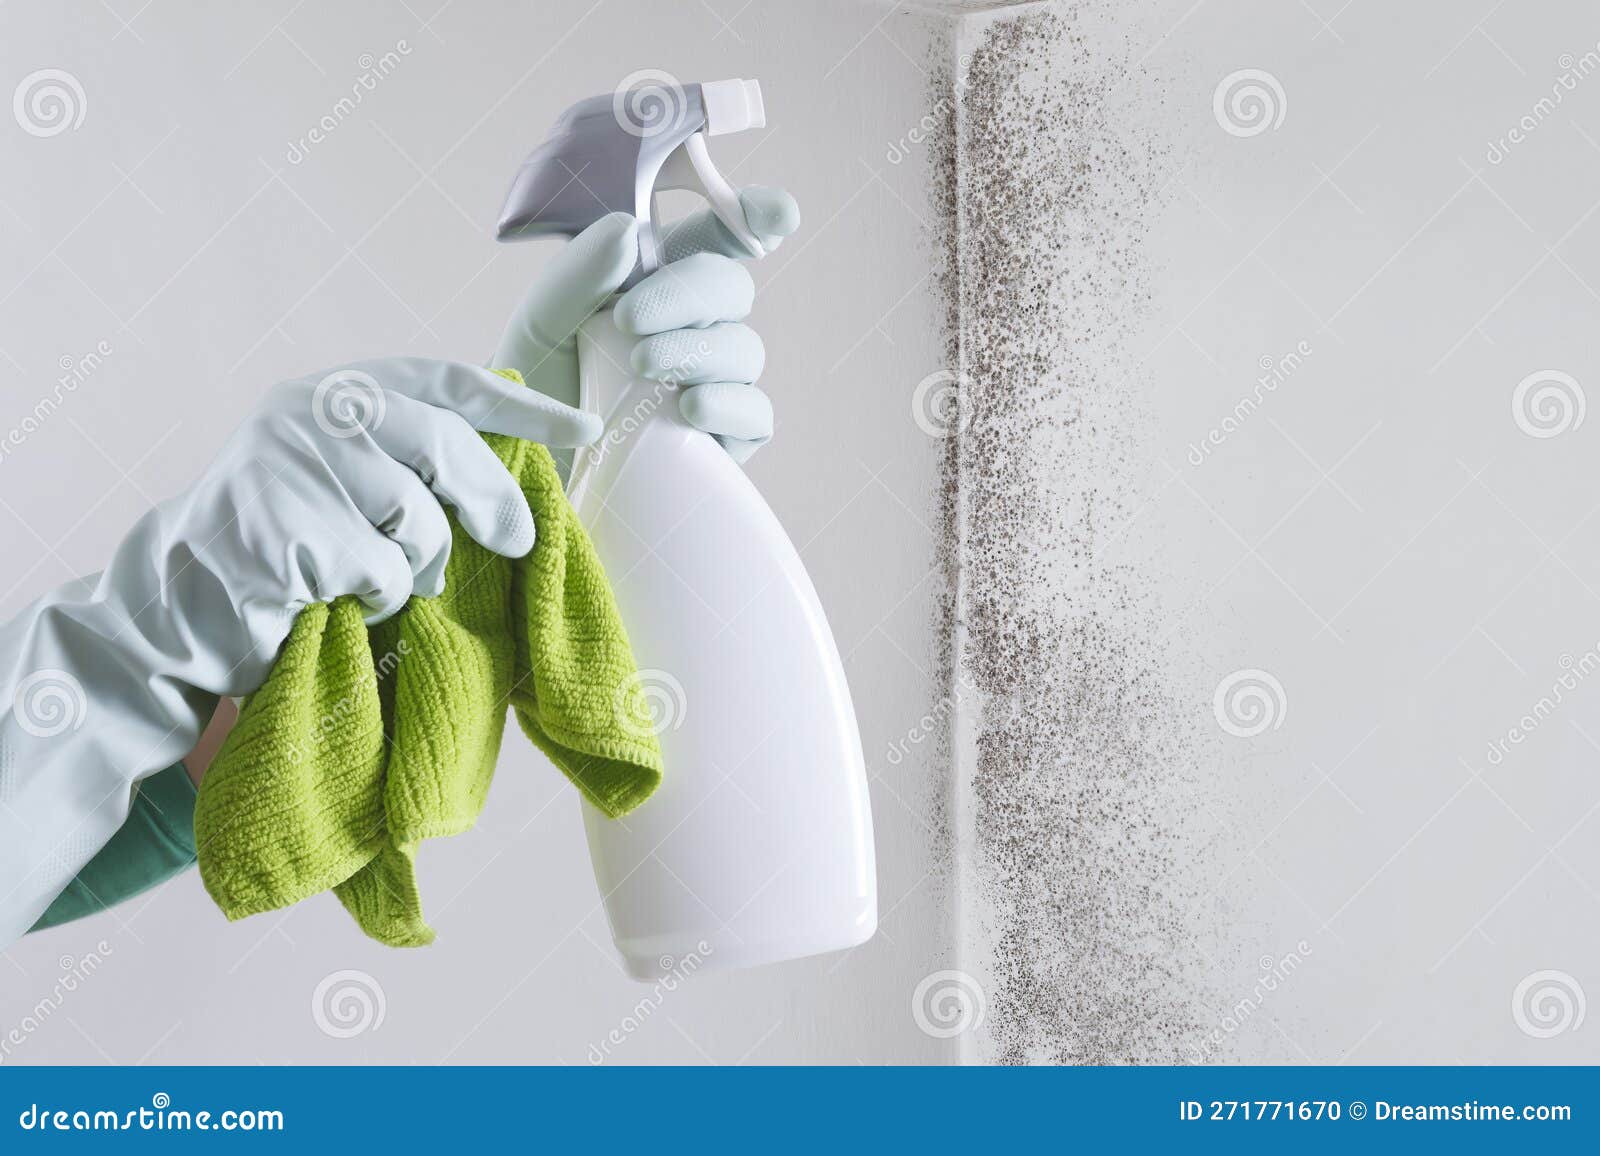 hands with glove and spray bottle  on wall with mold. eliminate mold with specialized anti-mold products. search cleaning